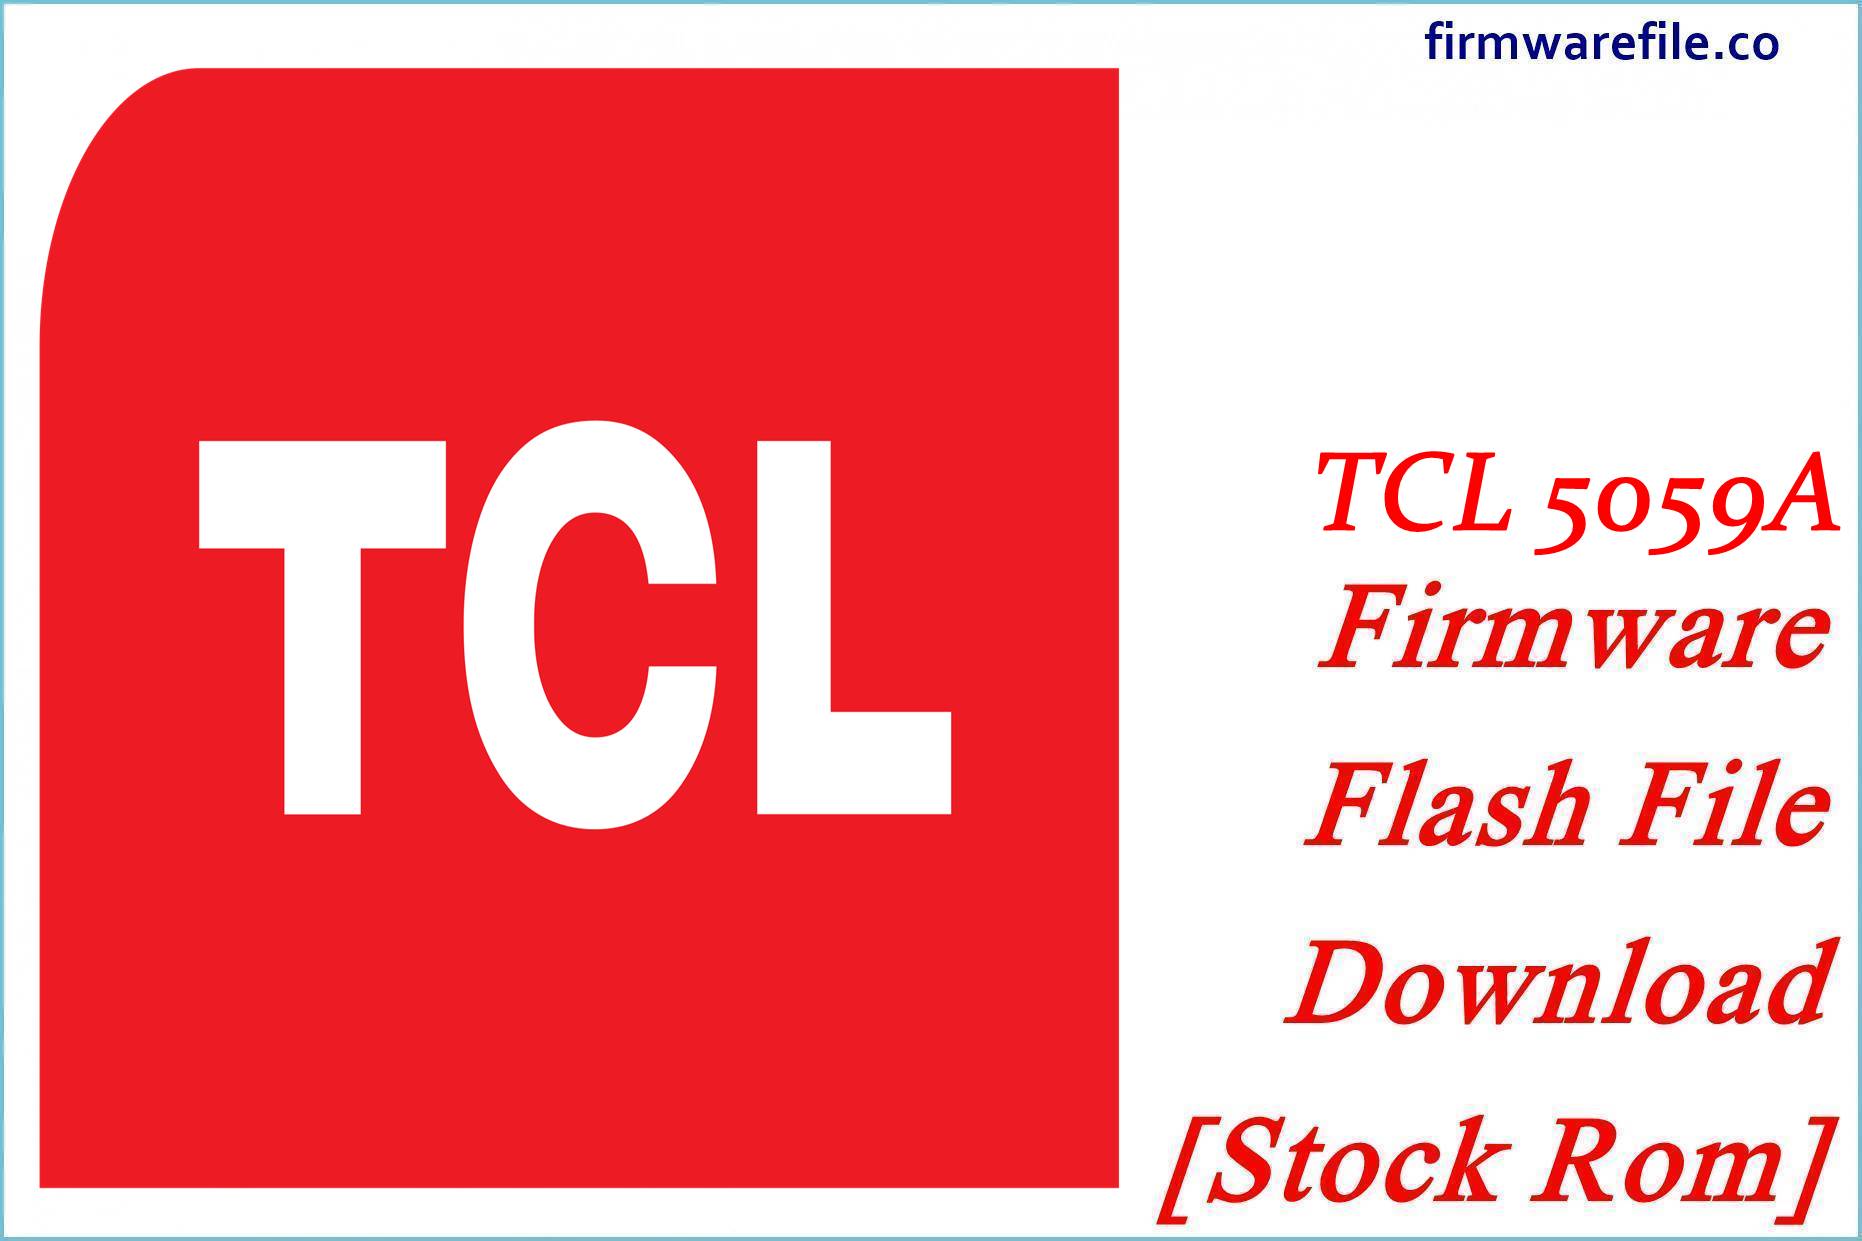 TCL 5059A